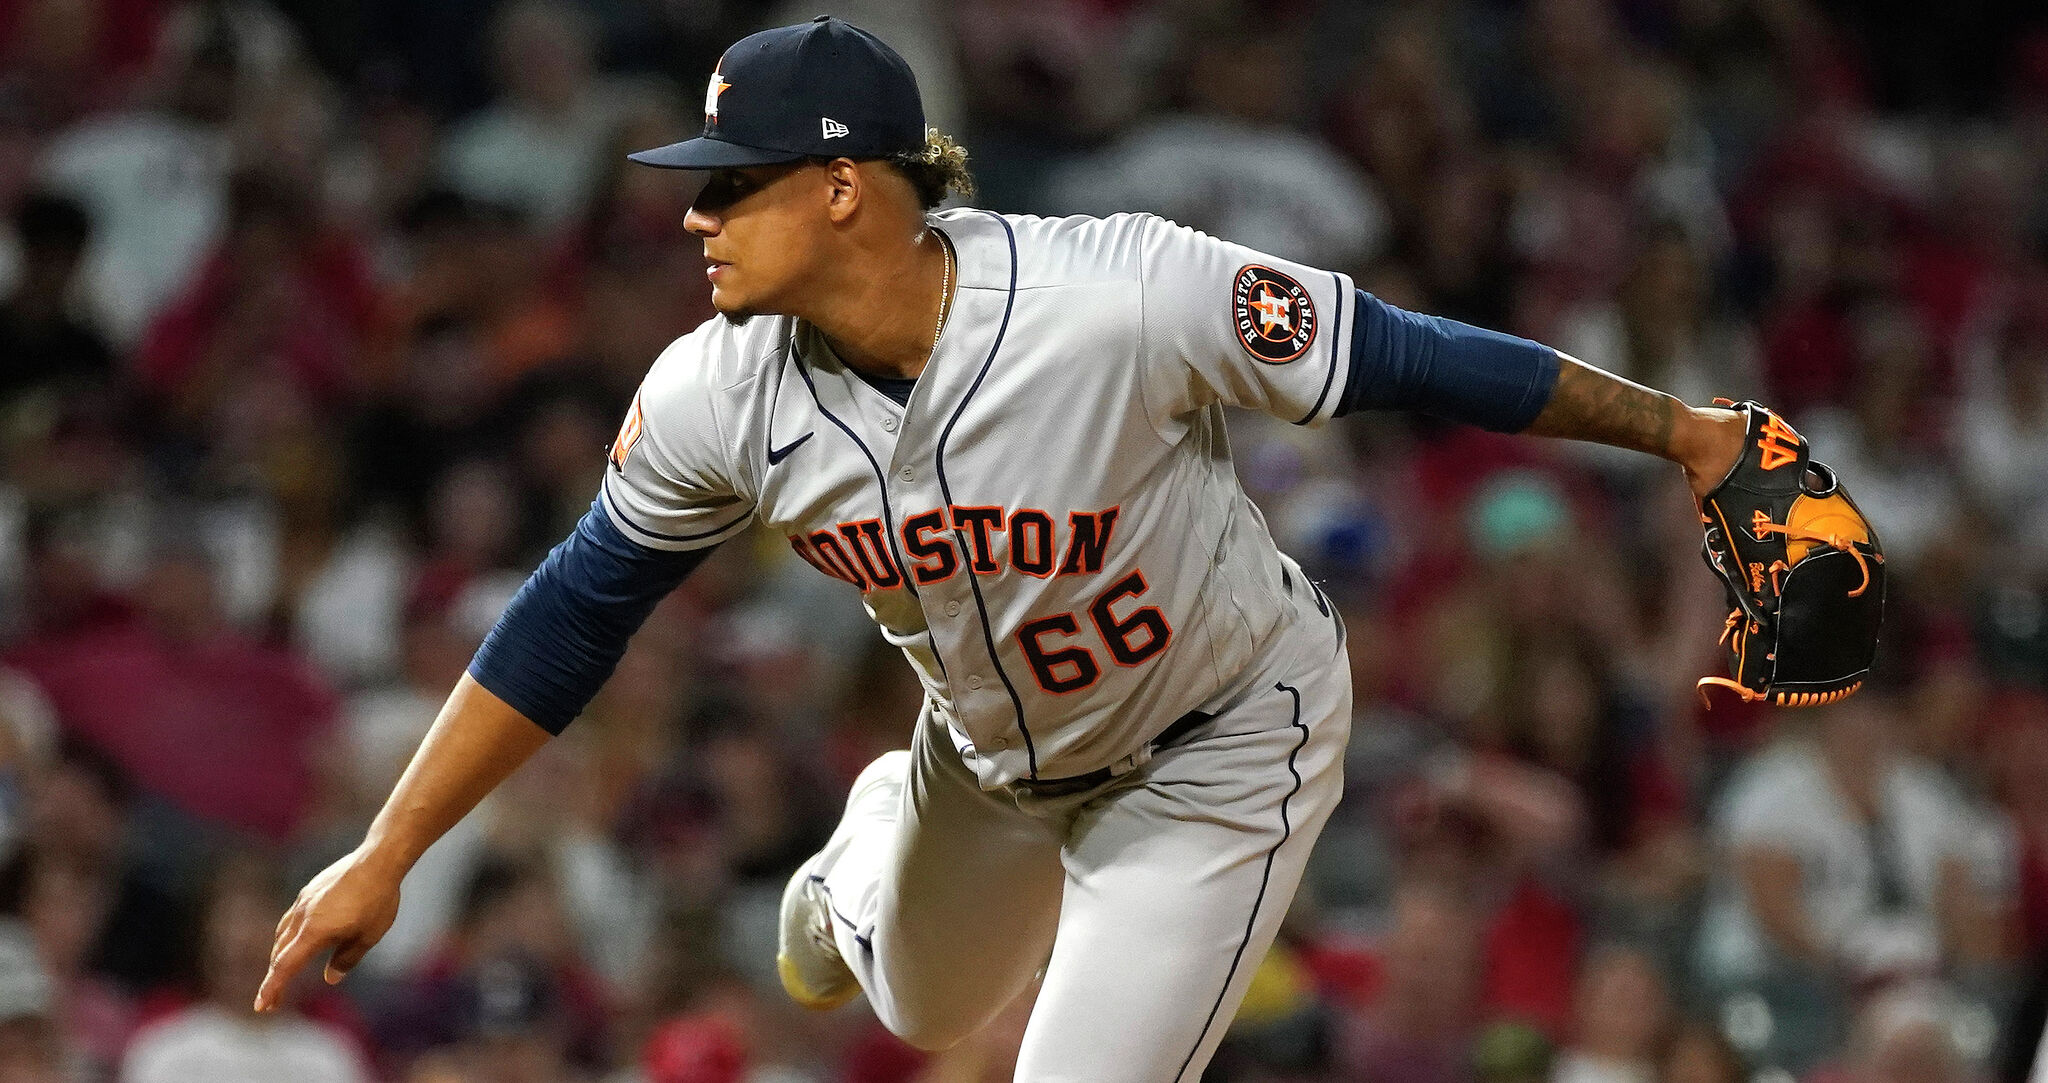 Bryan Abreu's strong start shows he's a weapon for the Astros' bullpen.